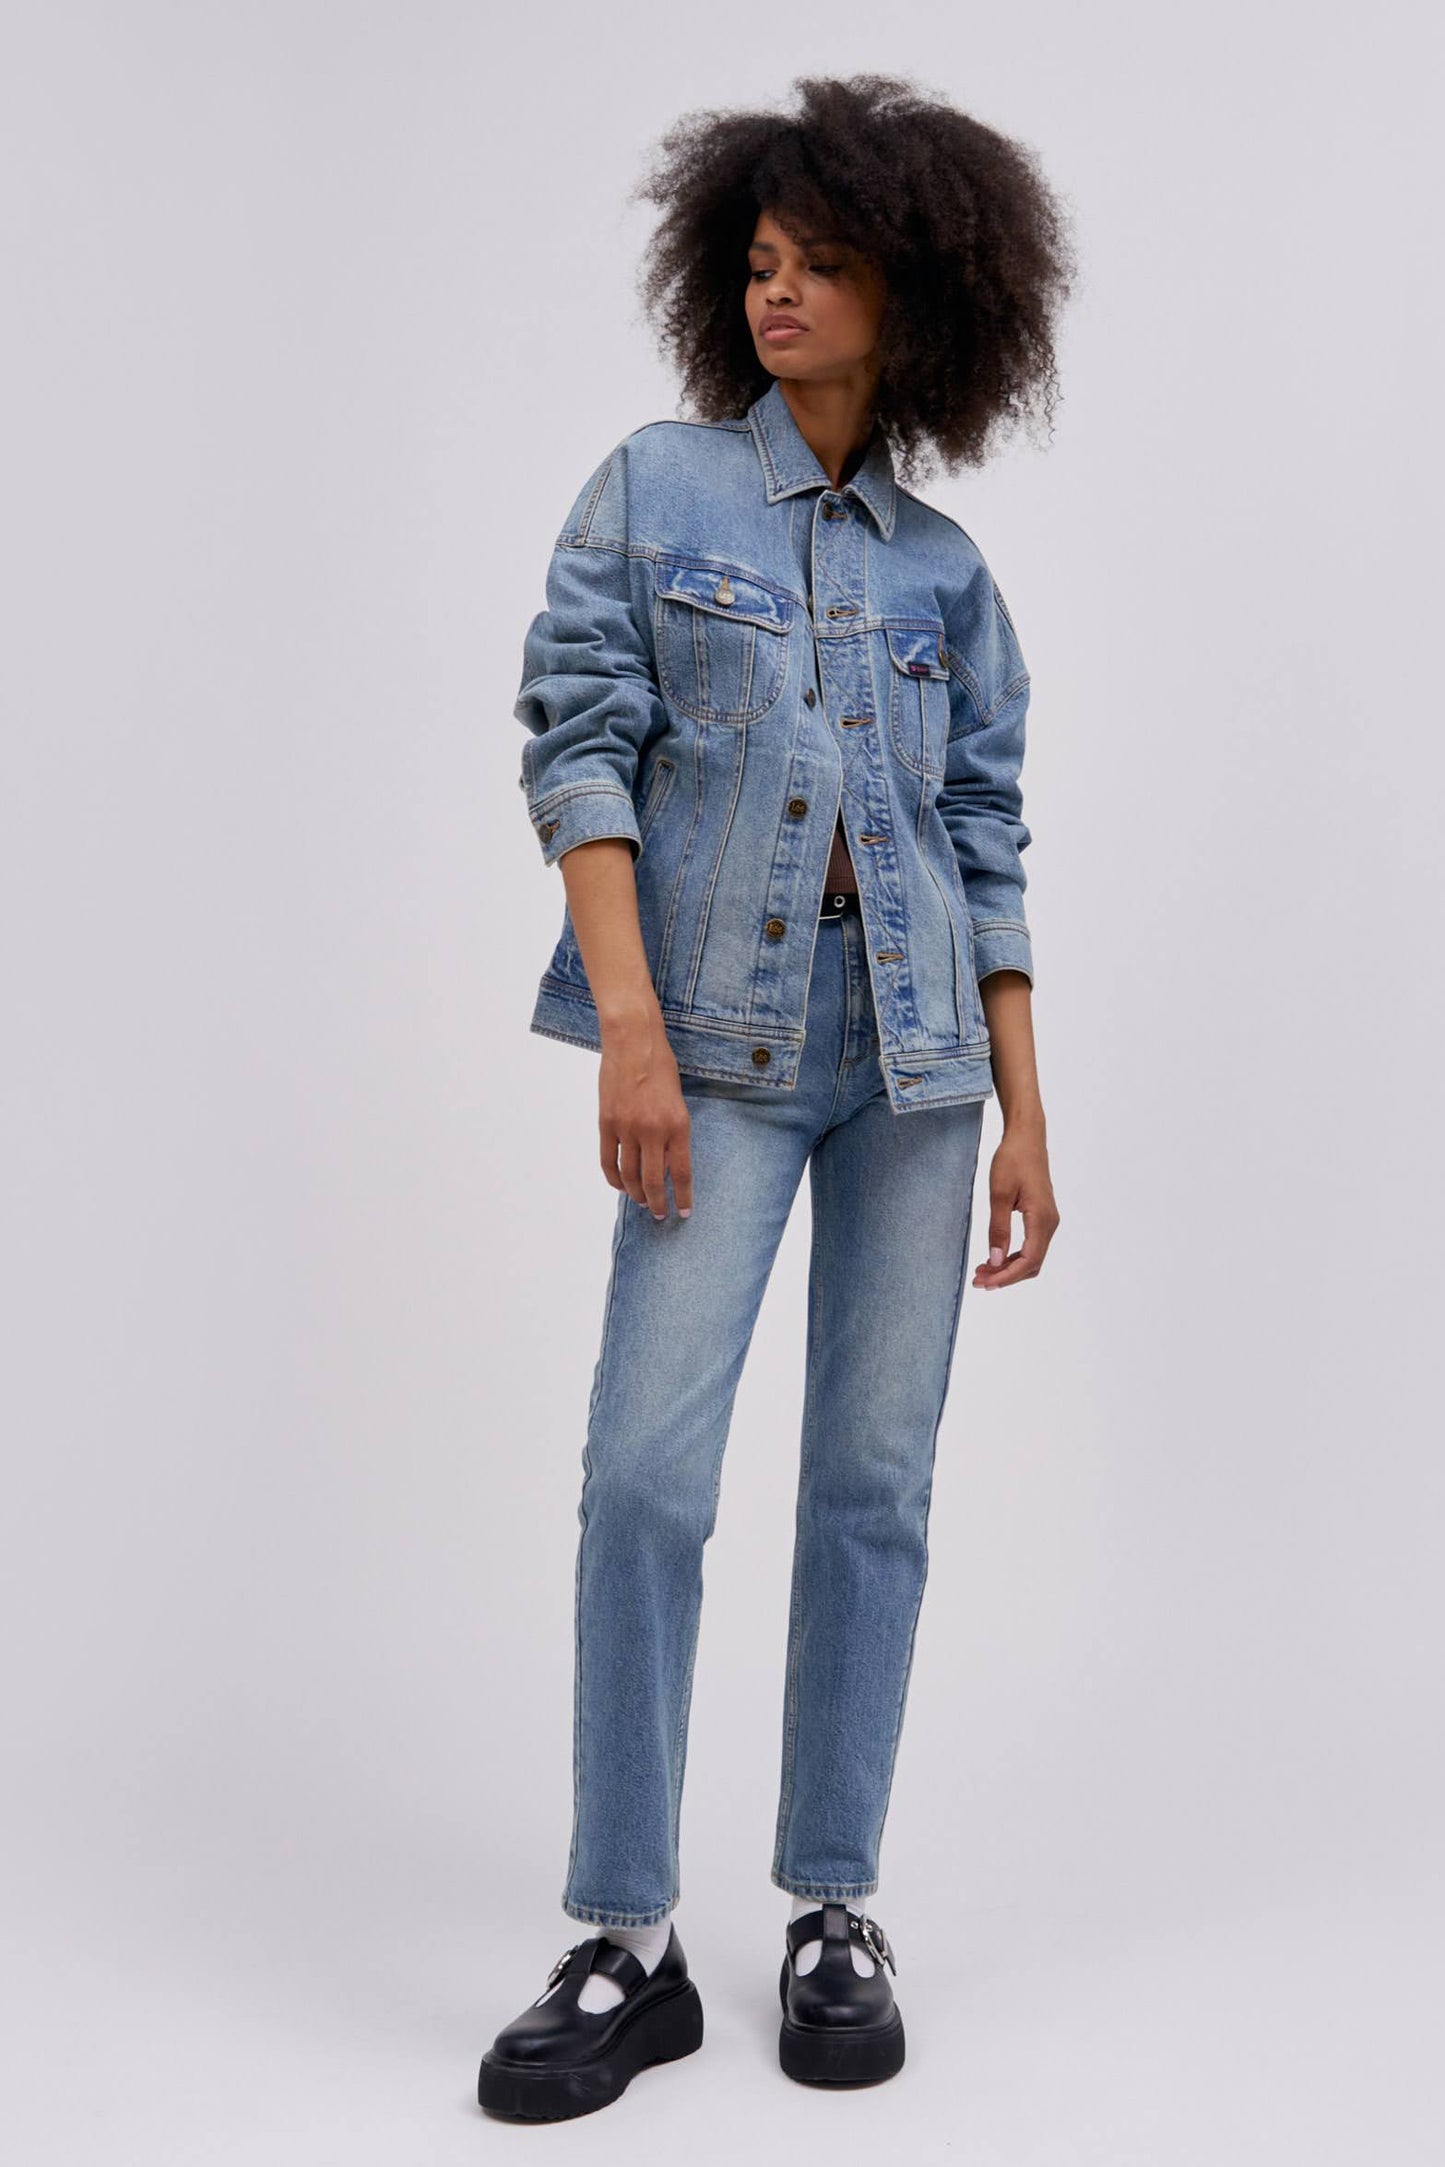 Curly haired model wearing a reimagined Lee Denim rider jacket in an oversized fit.